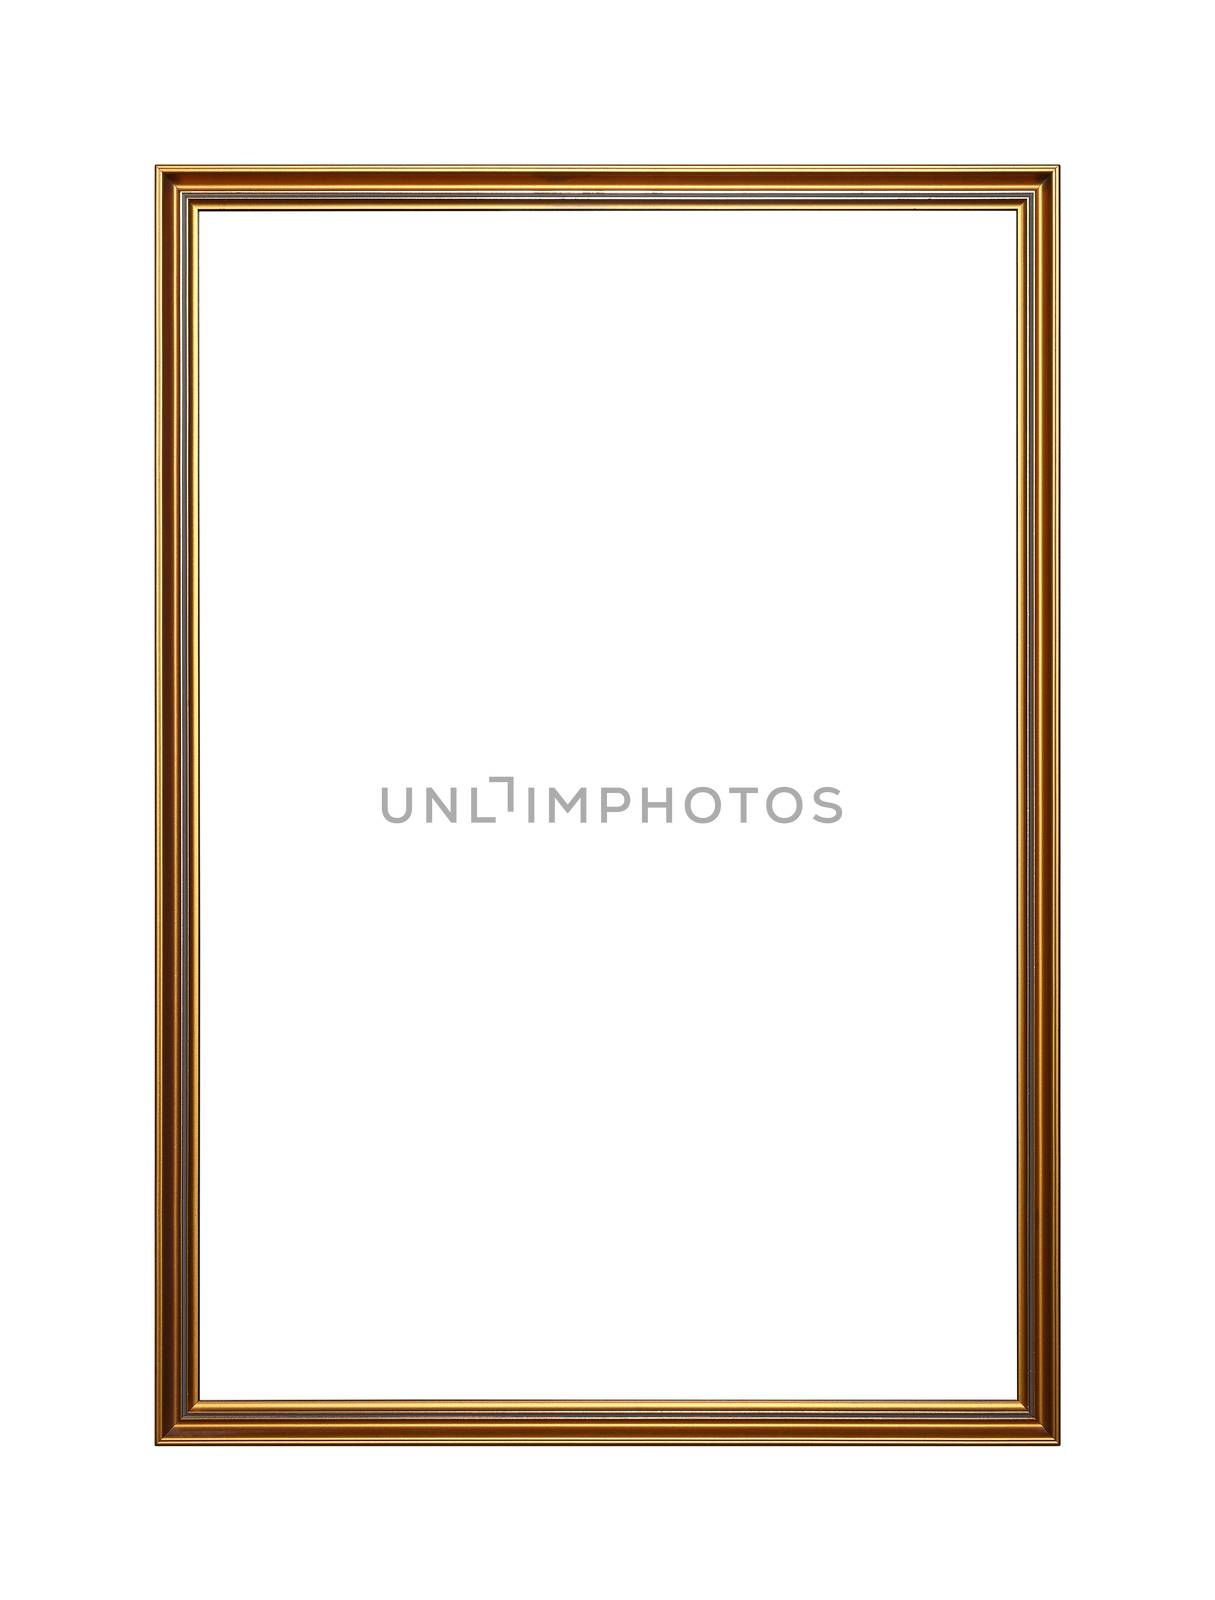 Simple vintage old wooden classic golden painted vertical rectangular frame for picture or photo, isolated on white background, close up